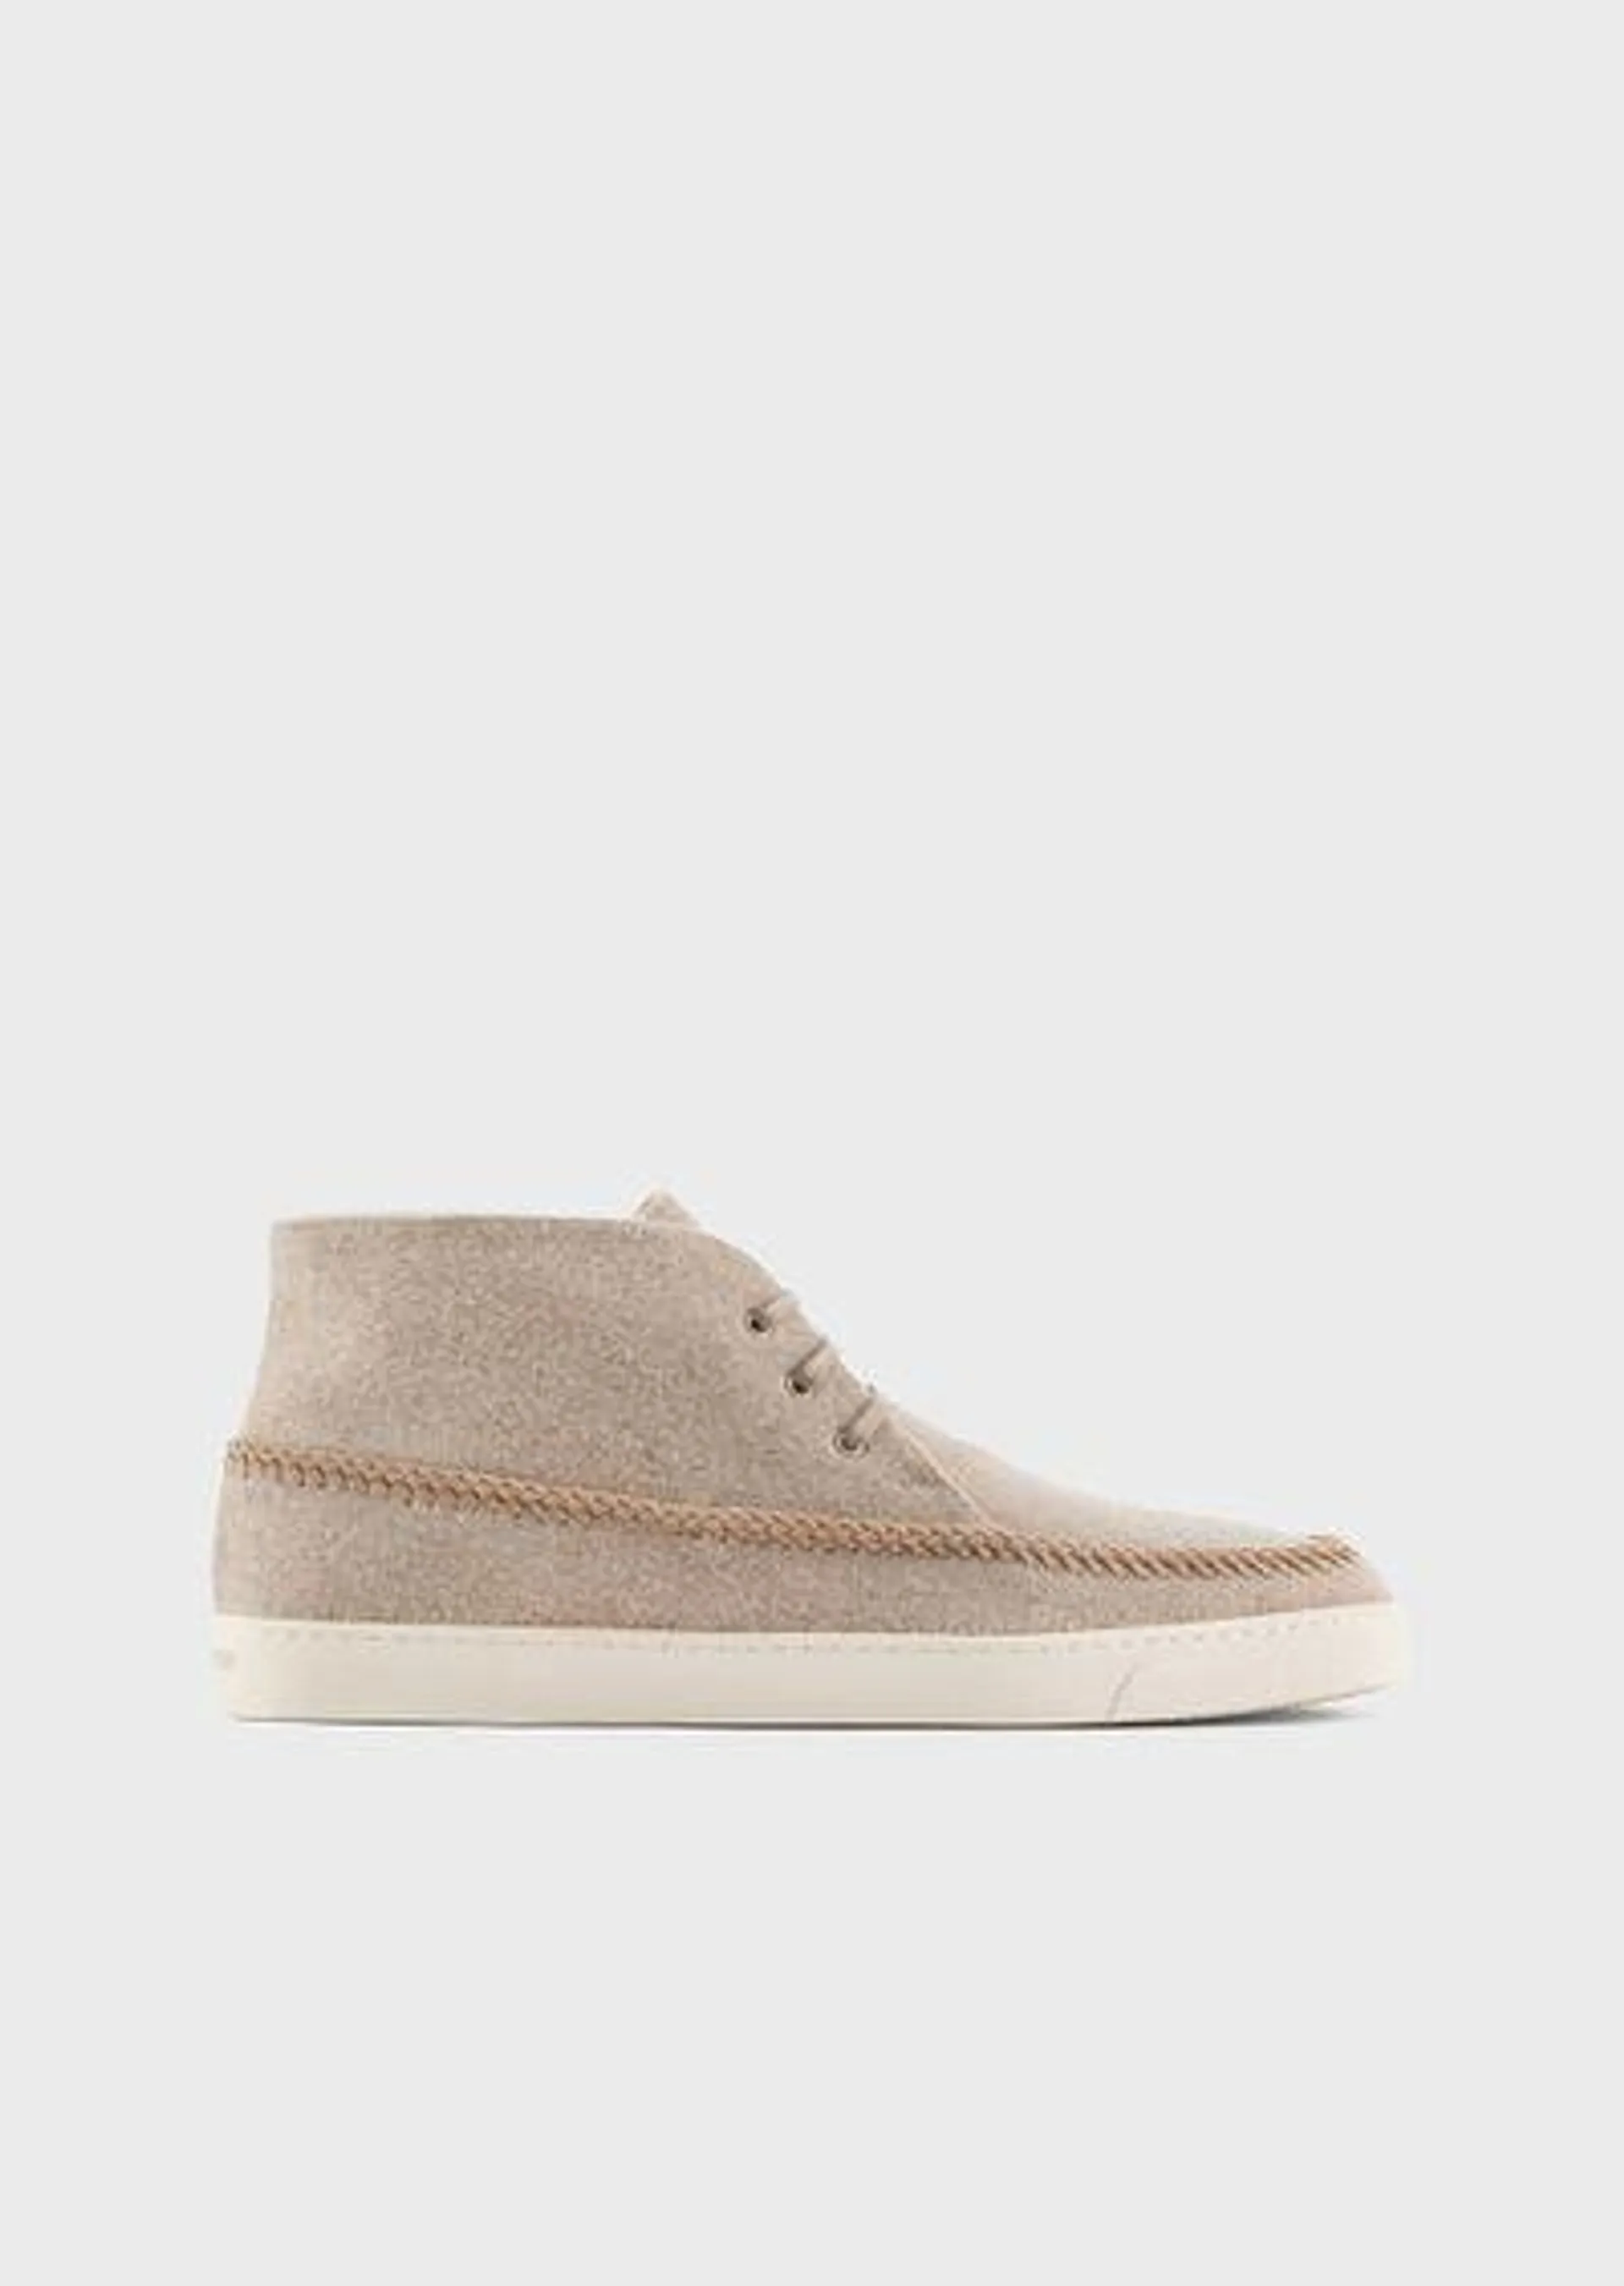 Wool and suede chukka boots